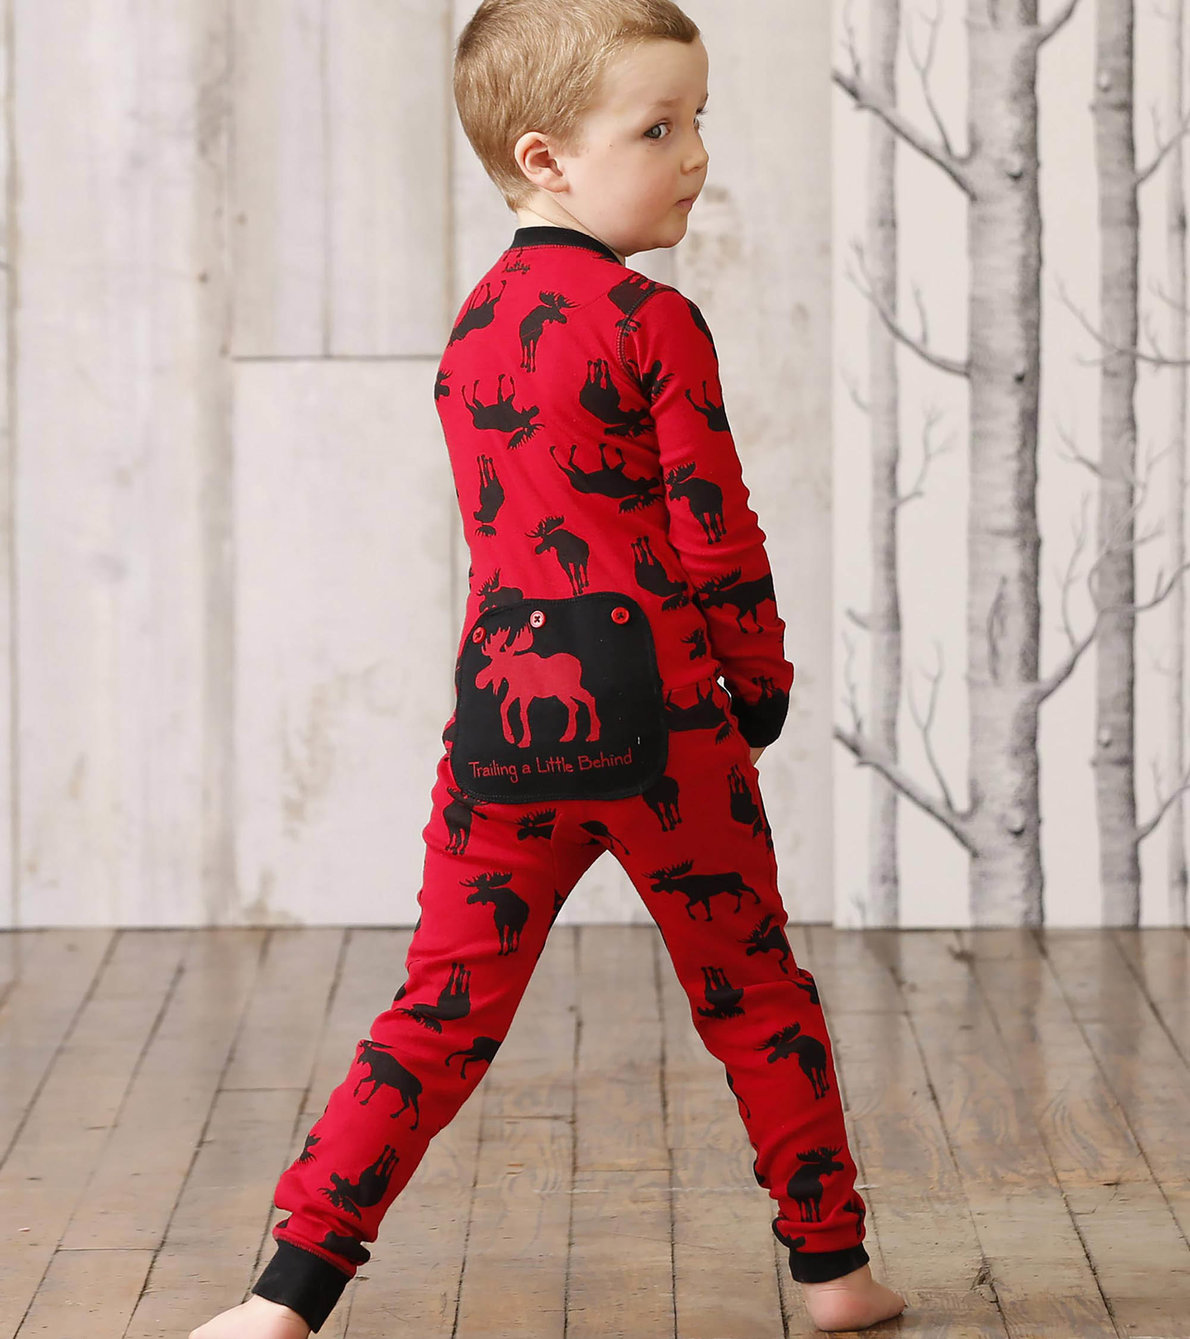 View larger image of Moose on Red "Trailing Behind" Kids Union Suit